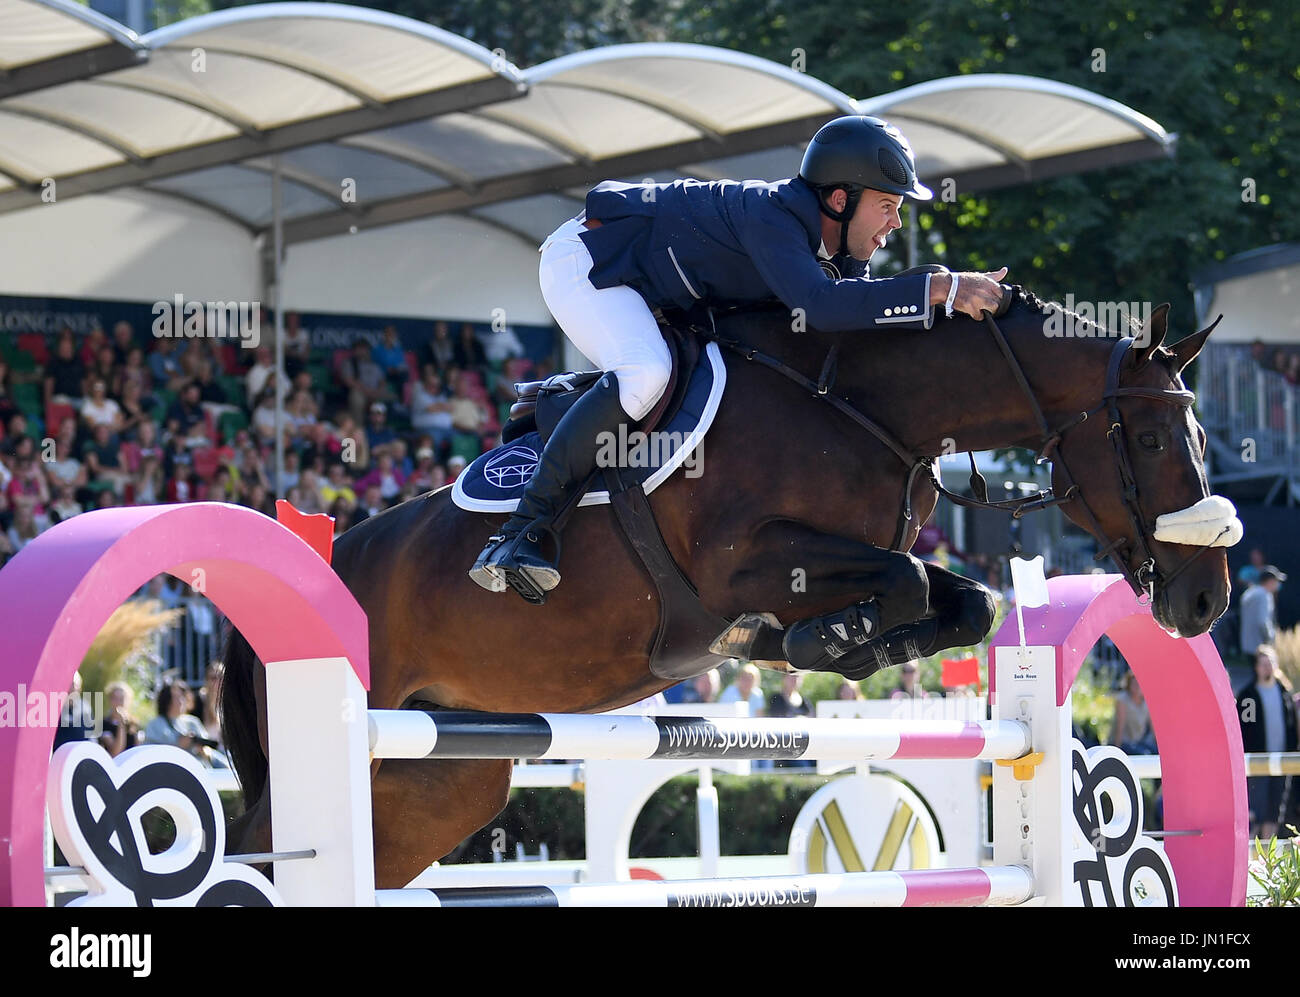 Berlin, Germany. 28th July, 2017. Show jumper Jack Towell in action on his horse Emilie de Diamant during the AG-DVAG sponsored event at the Global Champions Tour in Berlin, Germany, 28 July 2017. This year's show jumping competition opened on the 28 July and will run through to the 30 July 2017. Photo: Britta Pedersen/dpa-Zentralbild/ZB/dpa/Alamy Live News Stock Photo